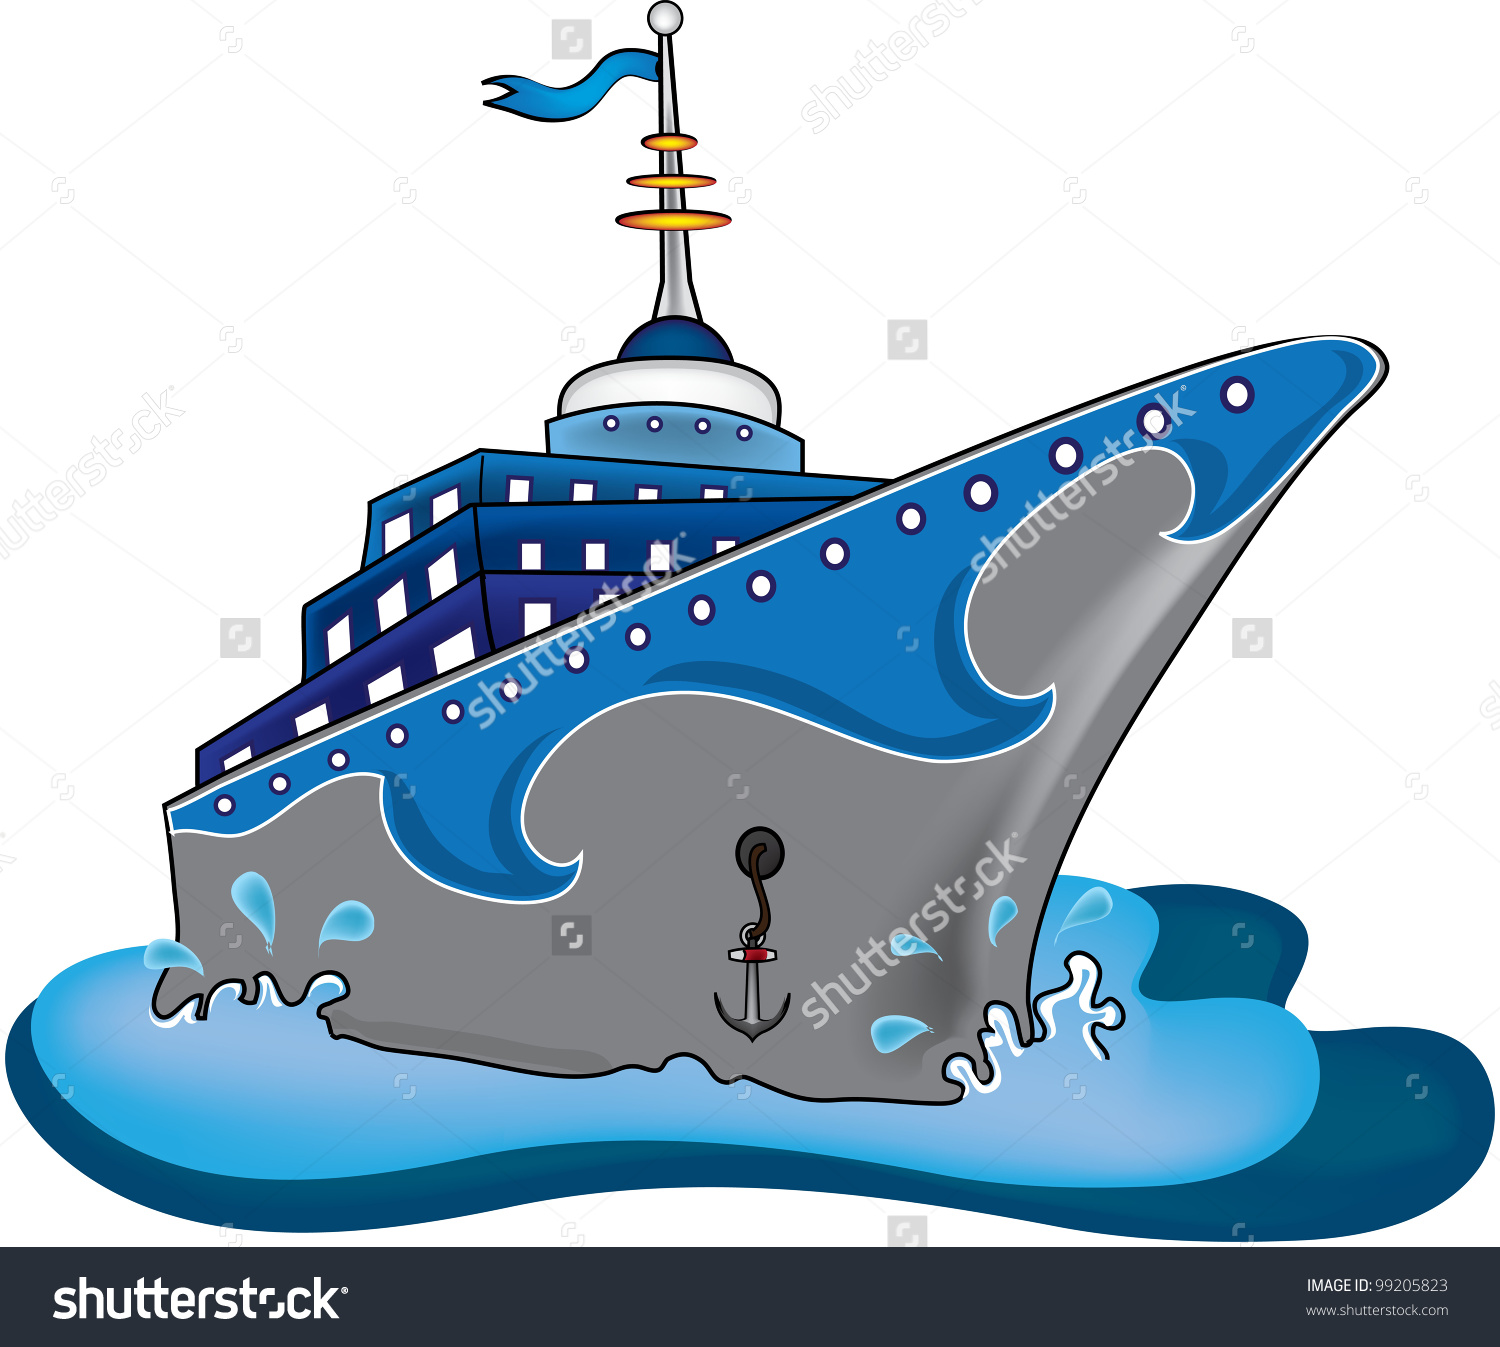 free clipart images cruise ships - photo #31